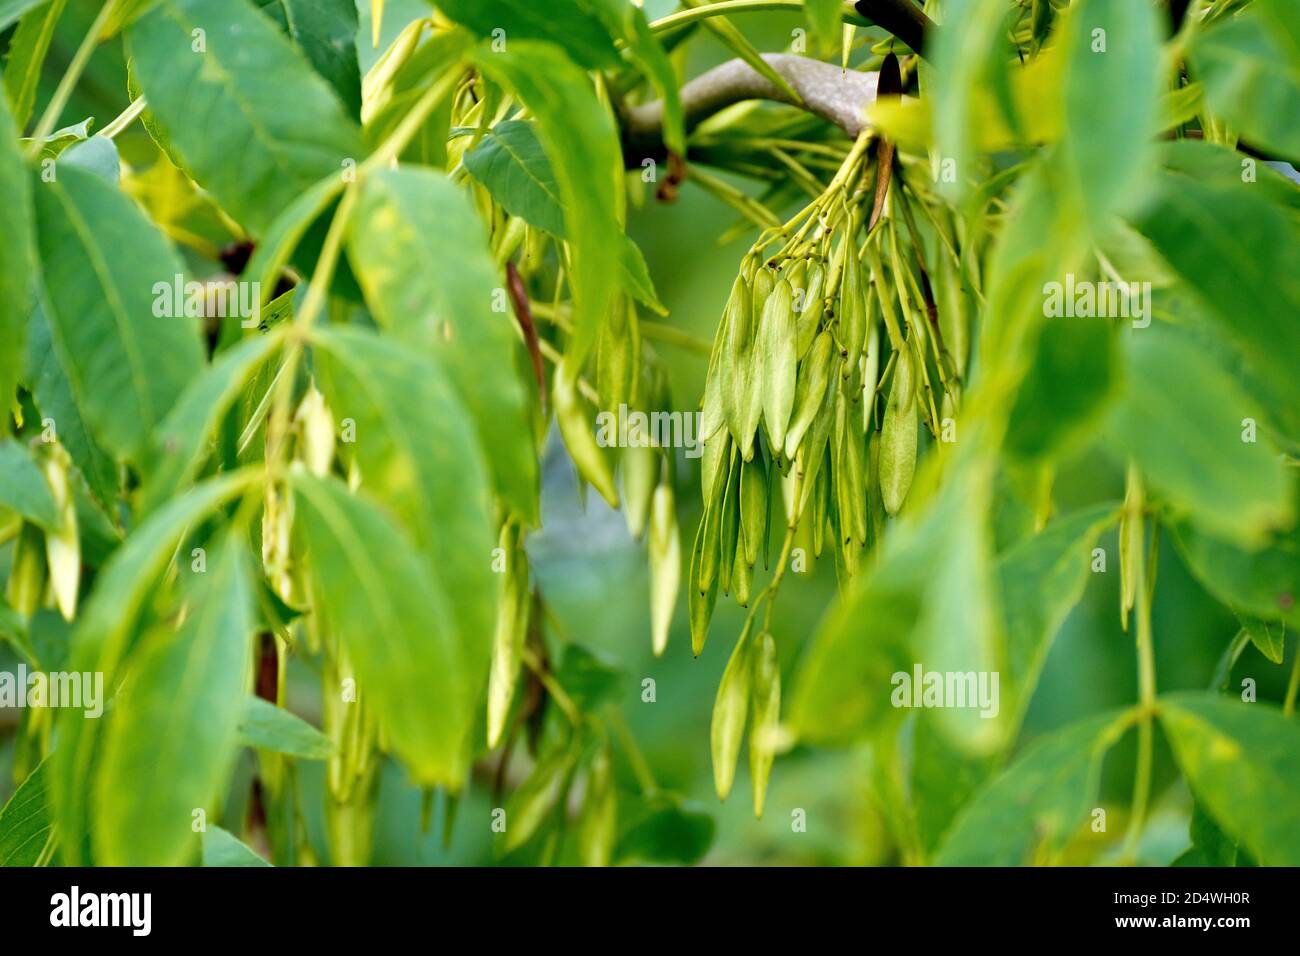 Ash (fraxinus excelsior), close up of a cluster of unripe fruits or keys hidden amongst the leaves of the tree in the early autumn. Stock Photo